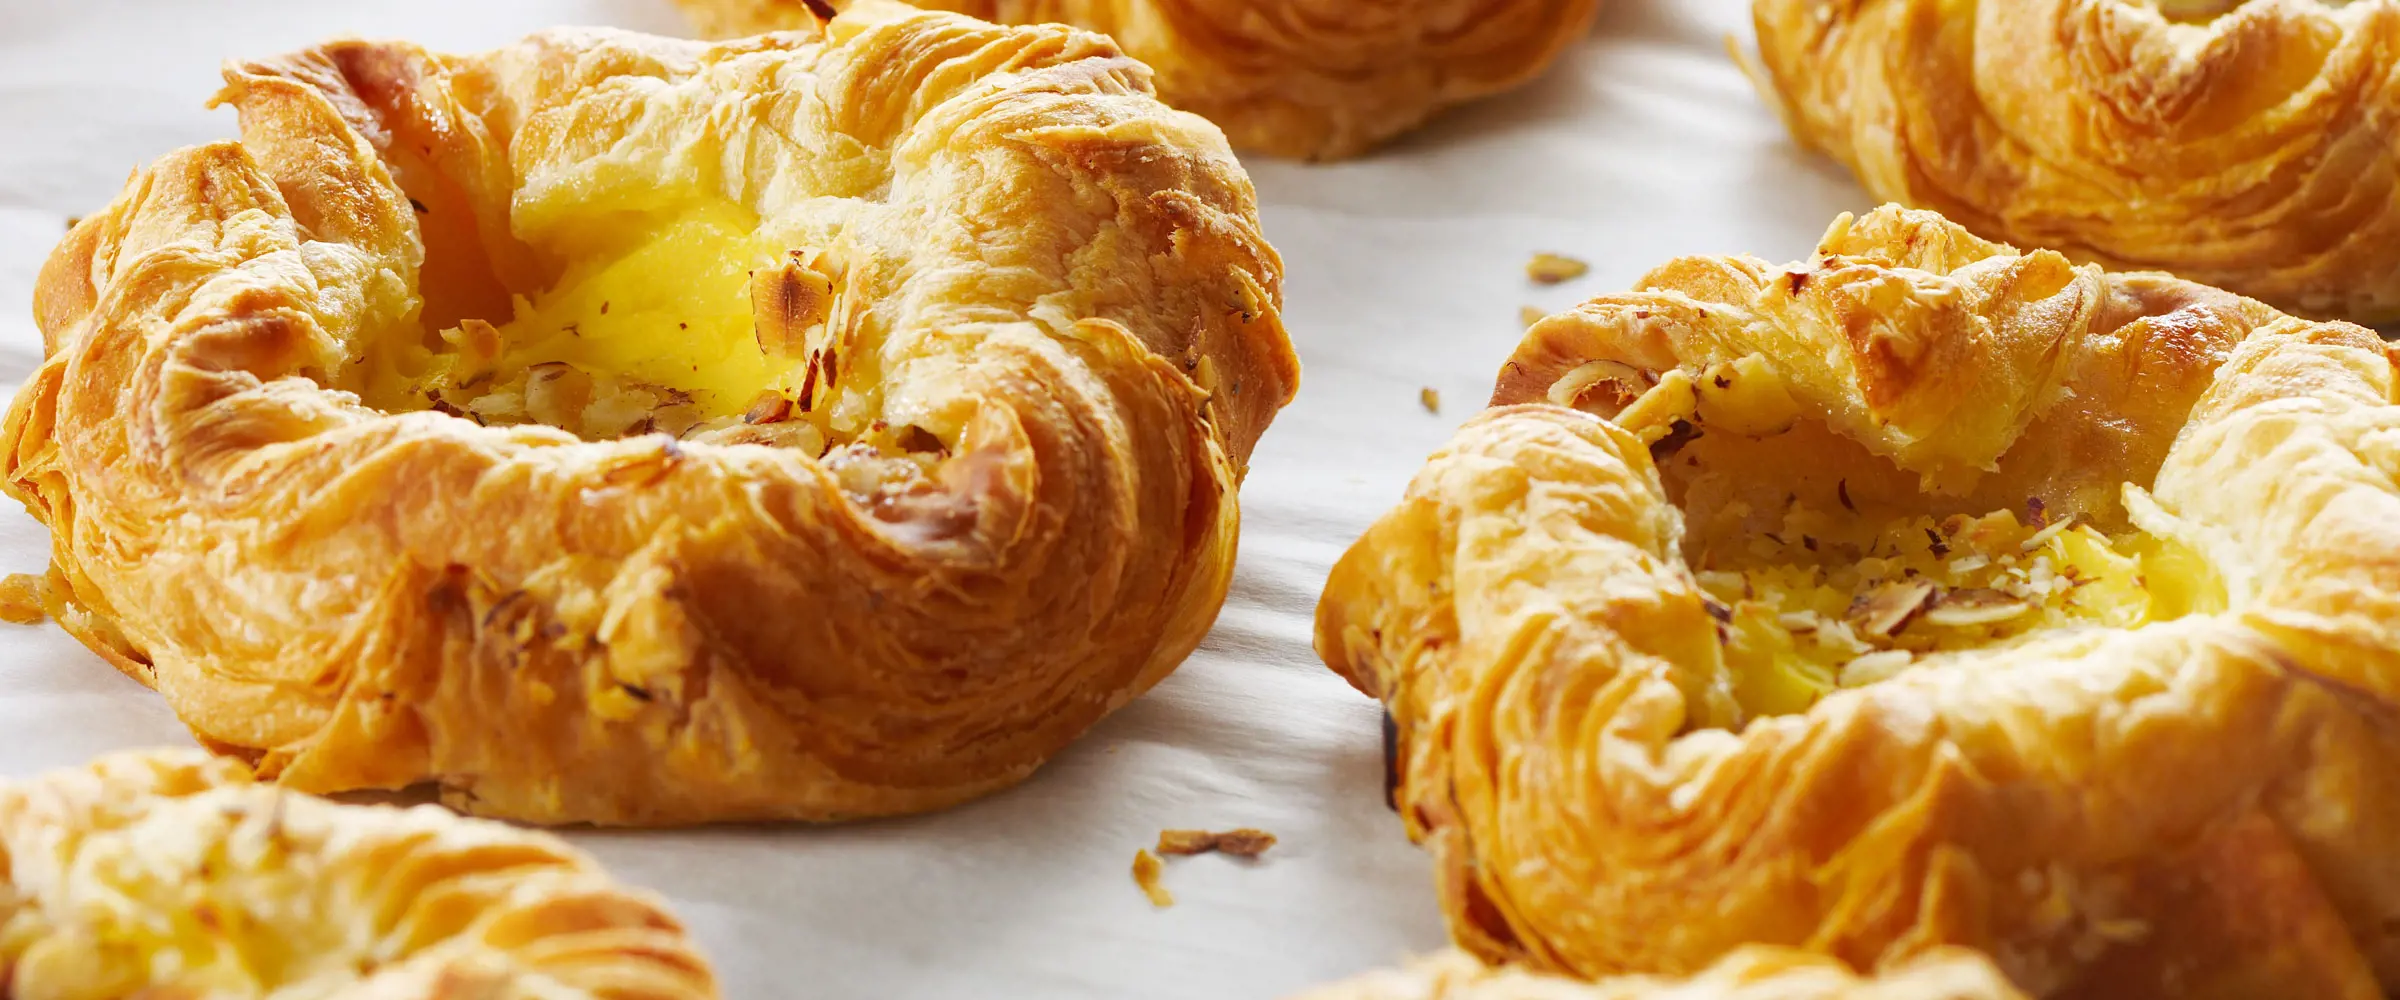 Nutrilac can enhance sweetness and improved lamination in Danish pastery